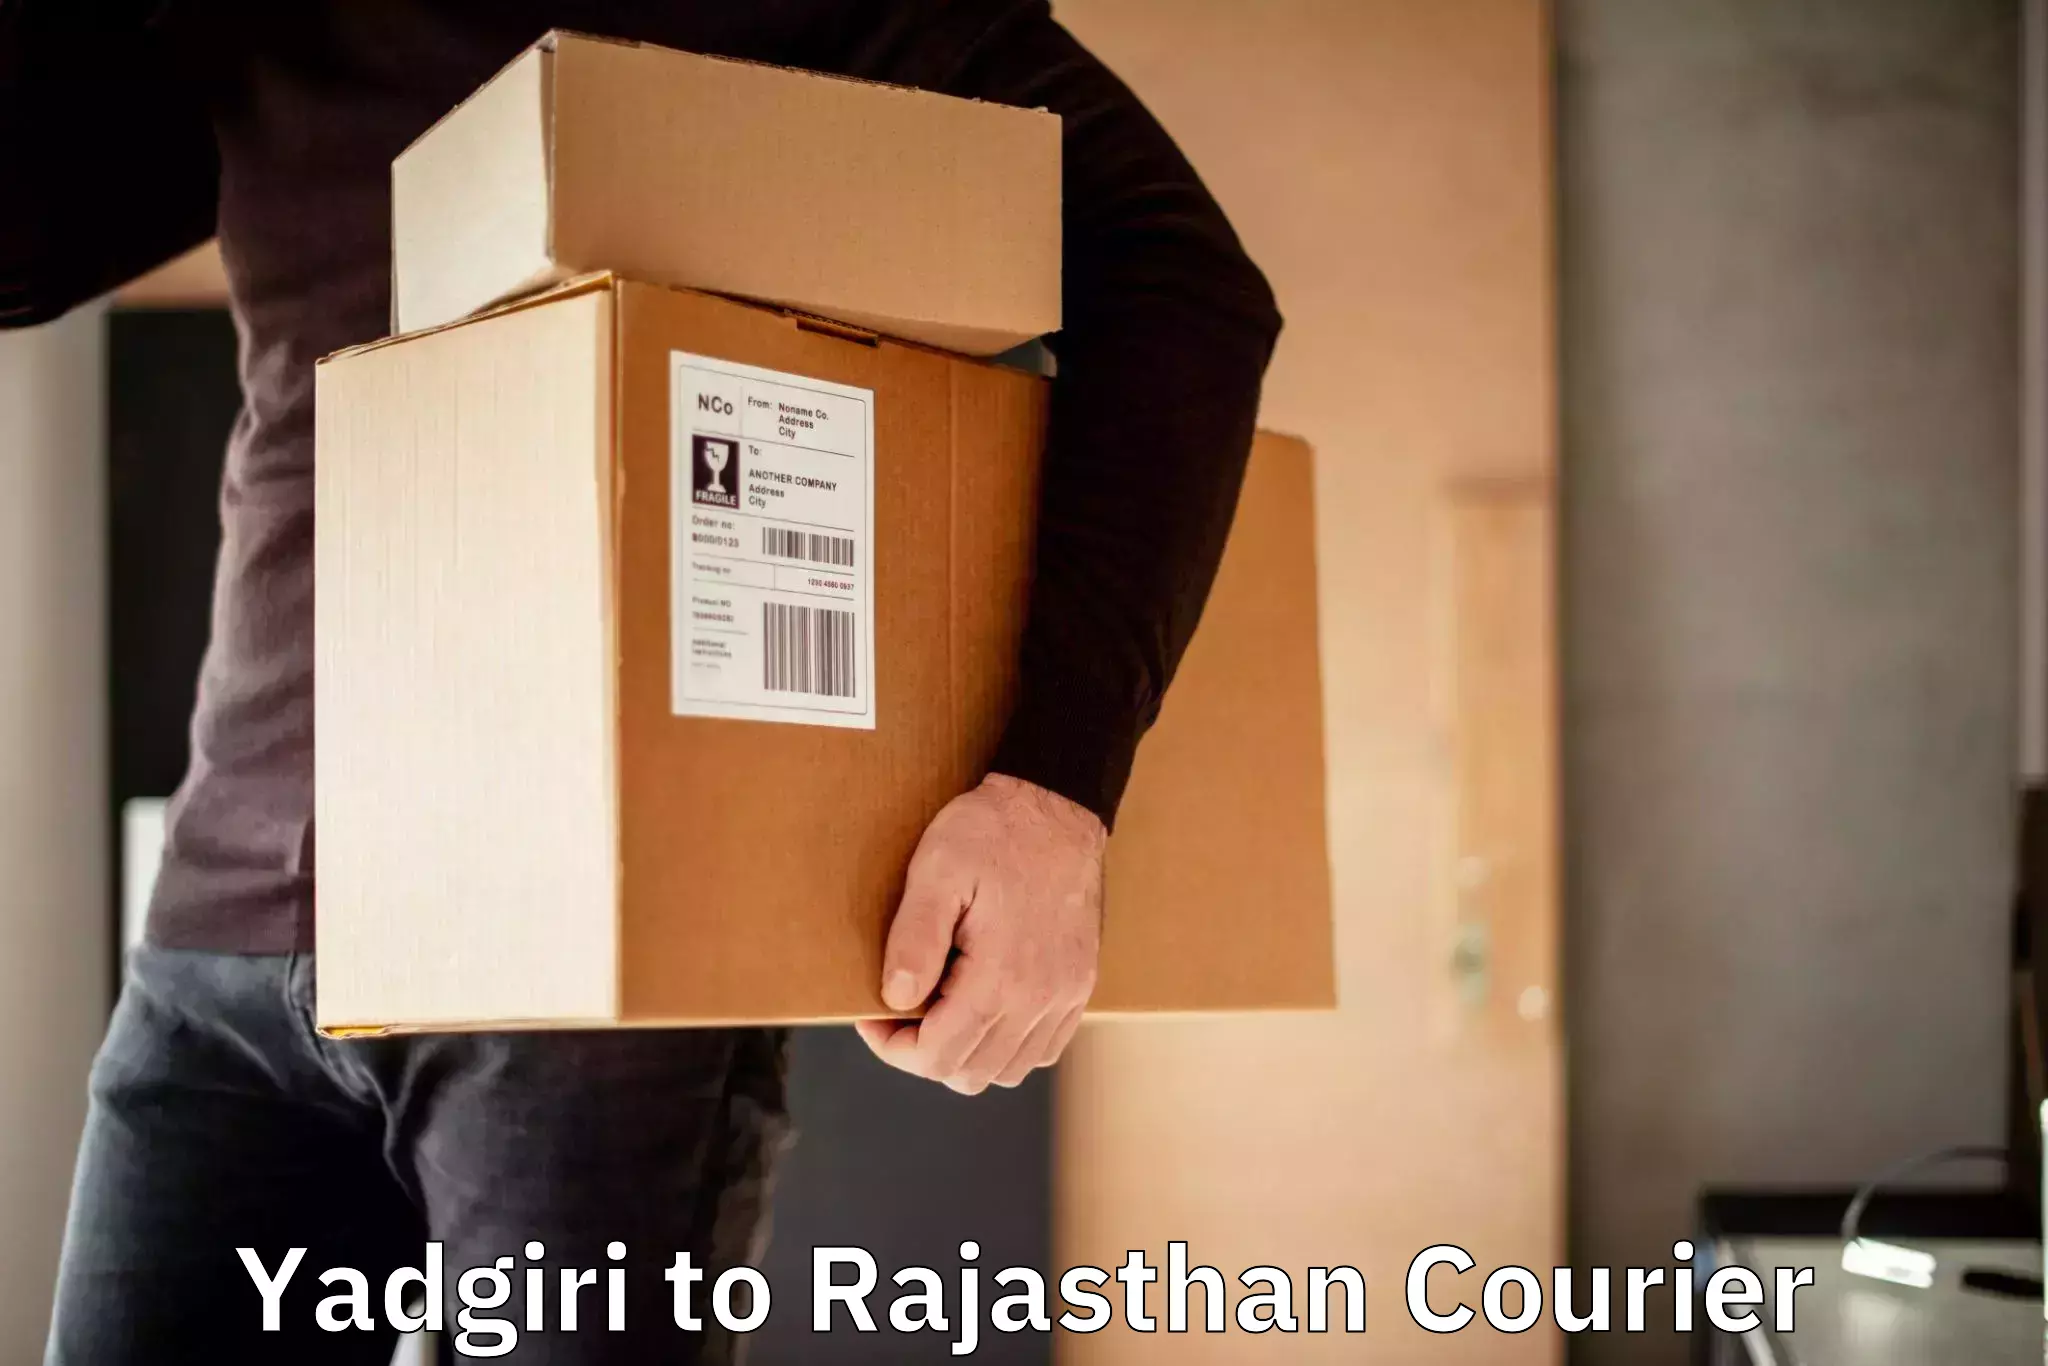 Reliable delivery network Yadgiri to NIT Jaipur